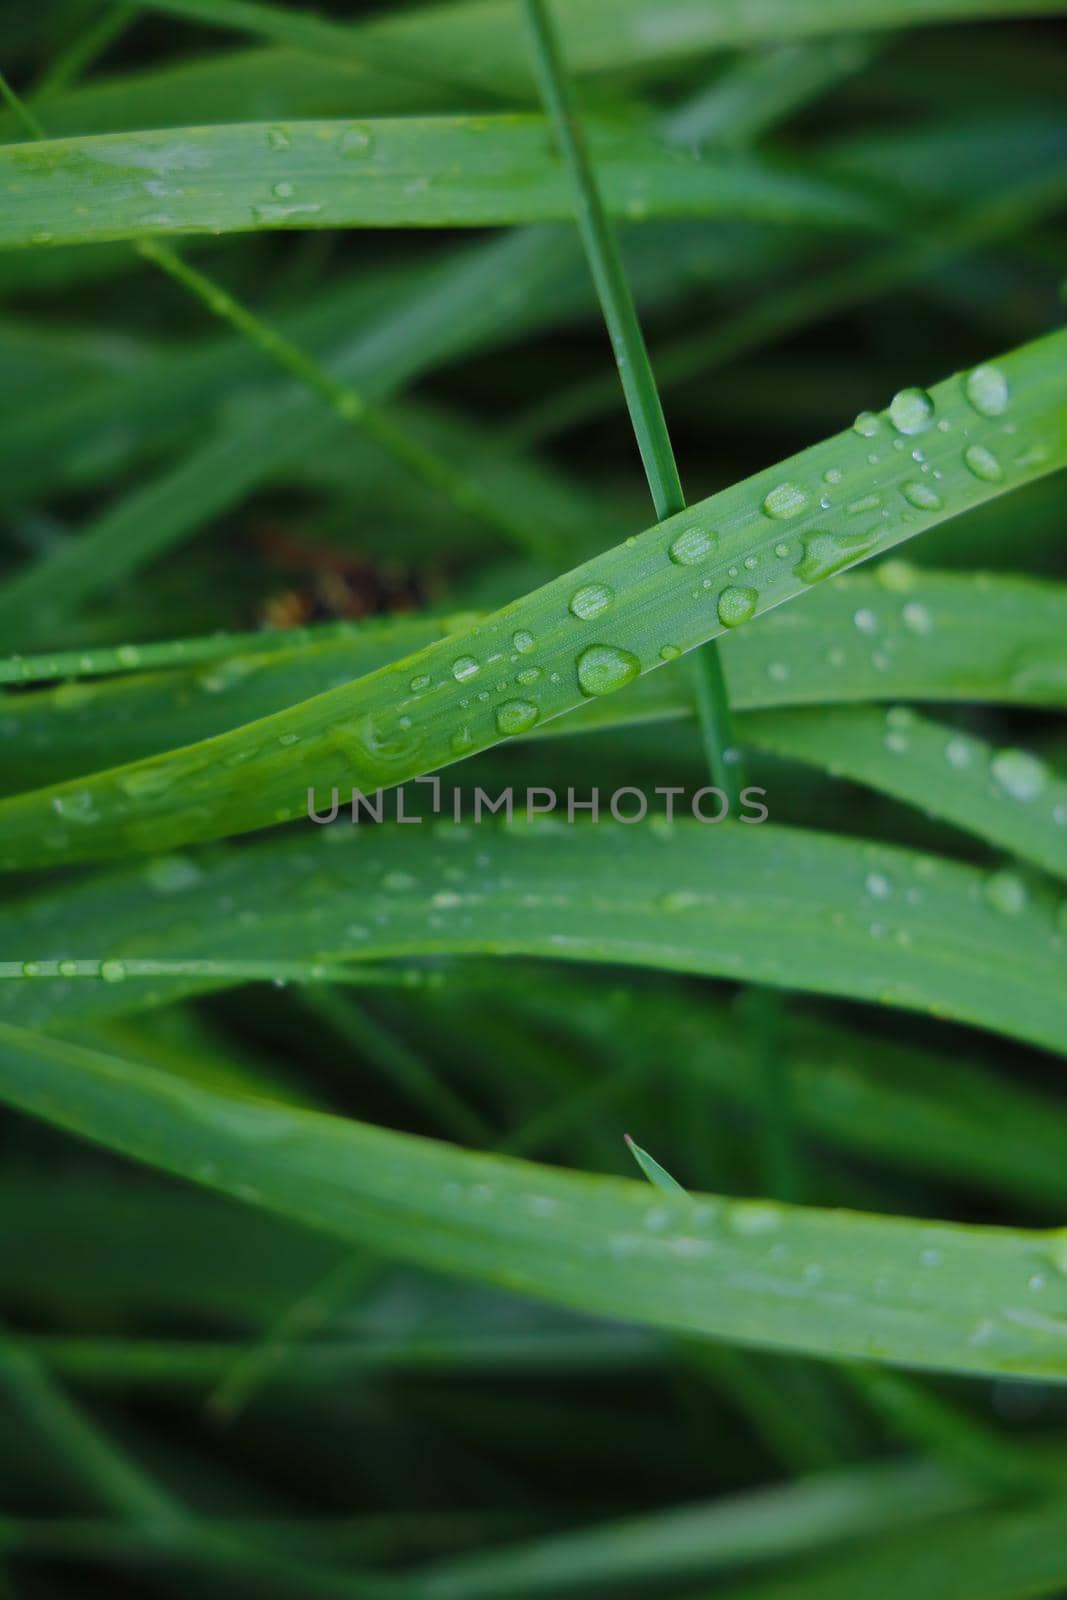 Water drops on the grass after rain